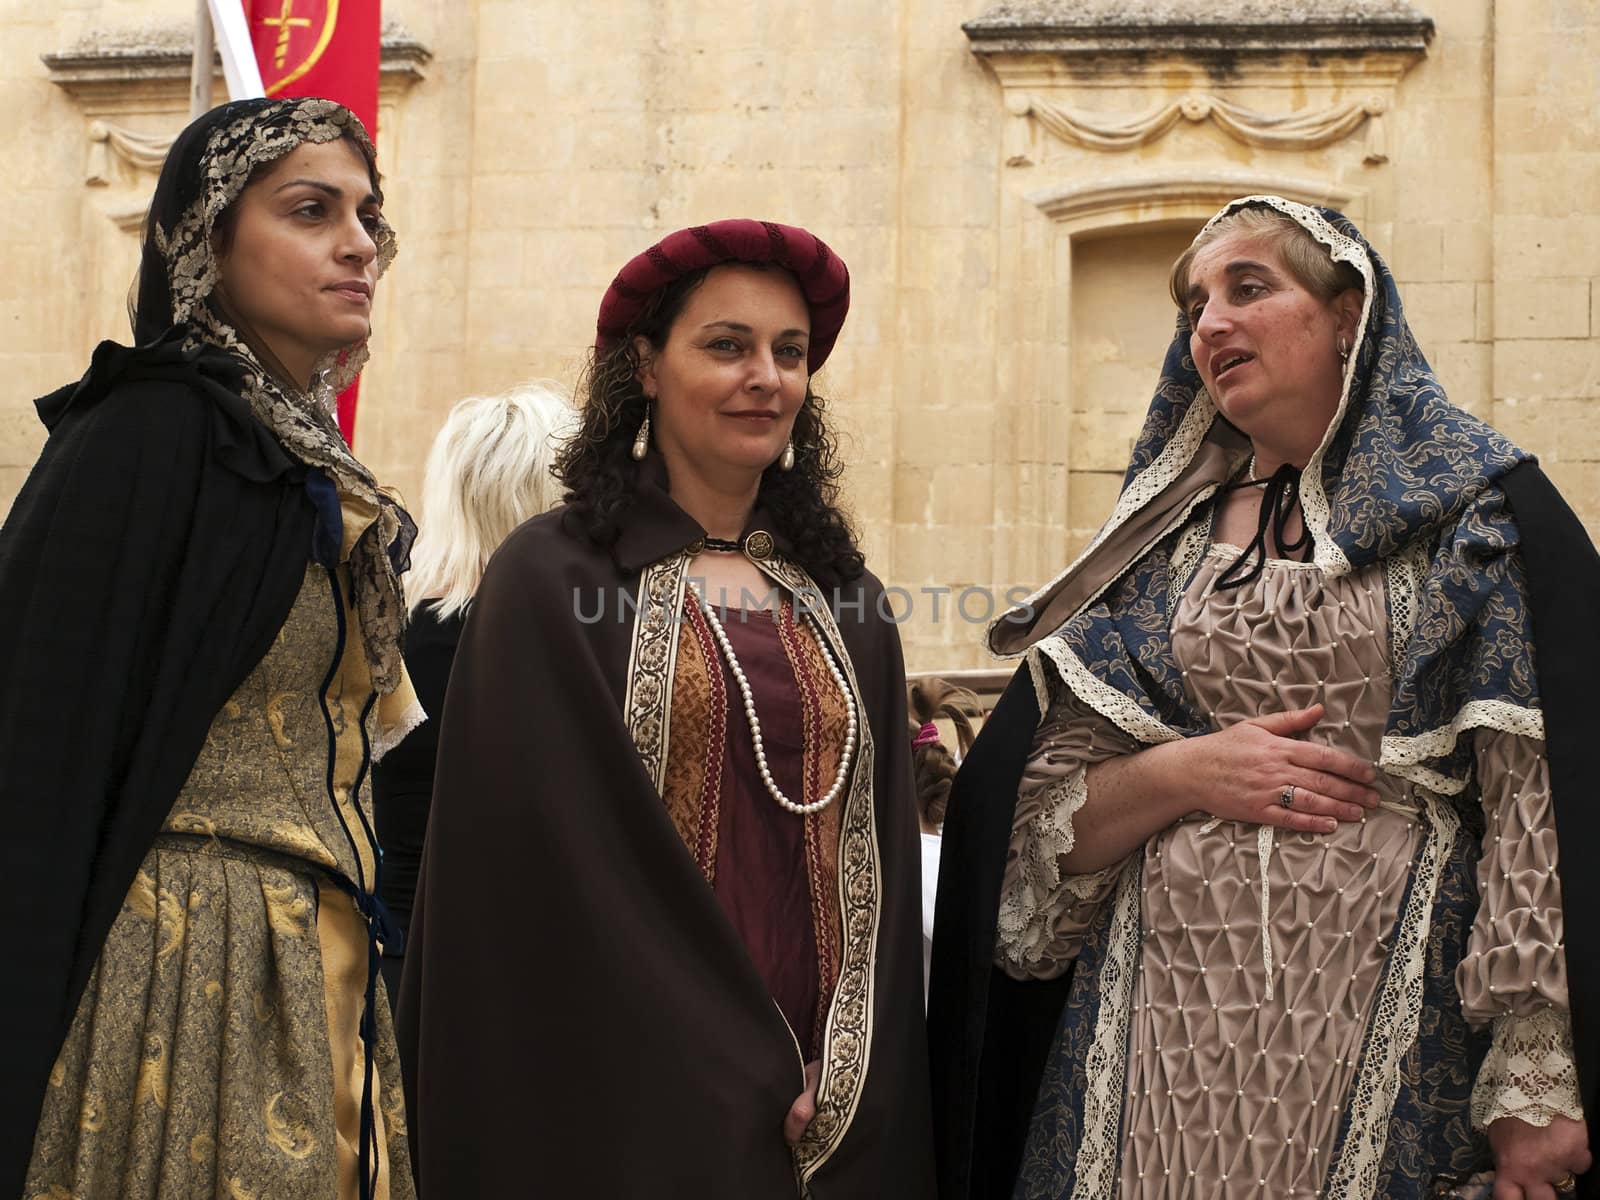 MDINA, MALTA - APR19 -  Noble woman during medieval reenactment in the old city of Mdina in Malta April 19, e